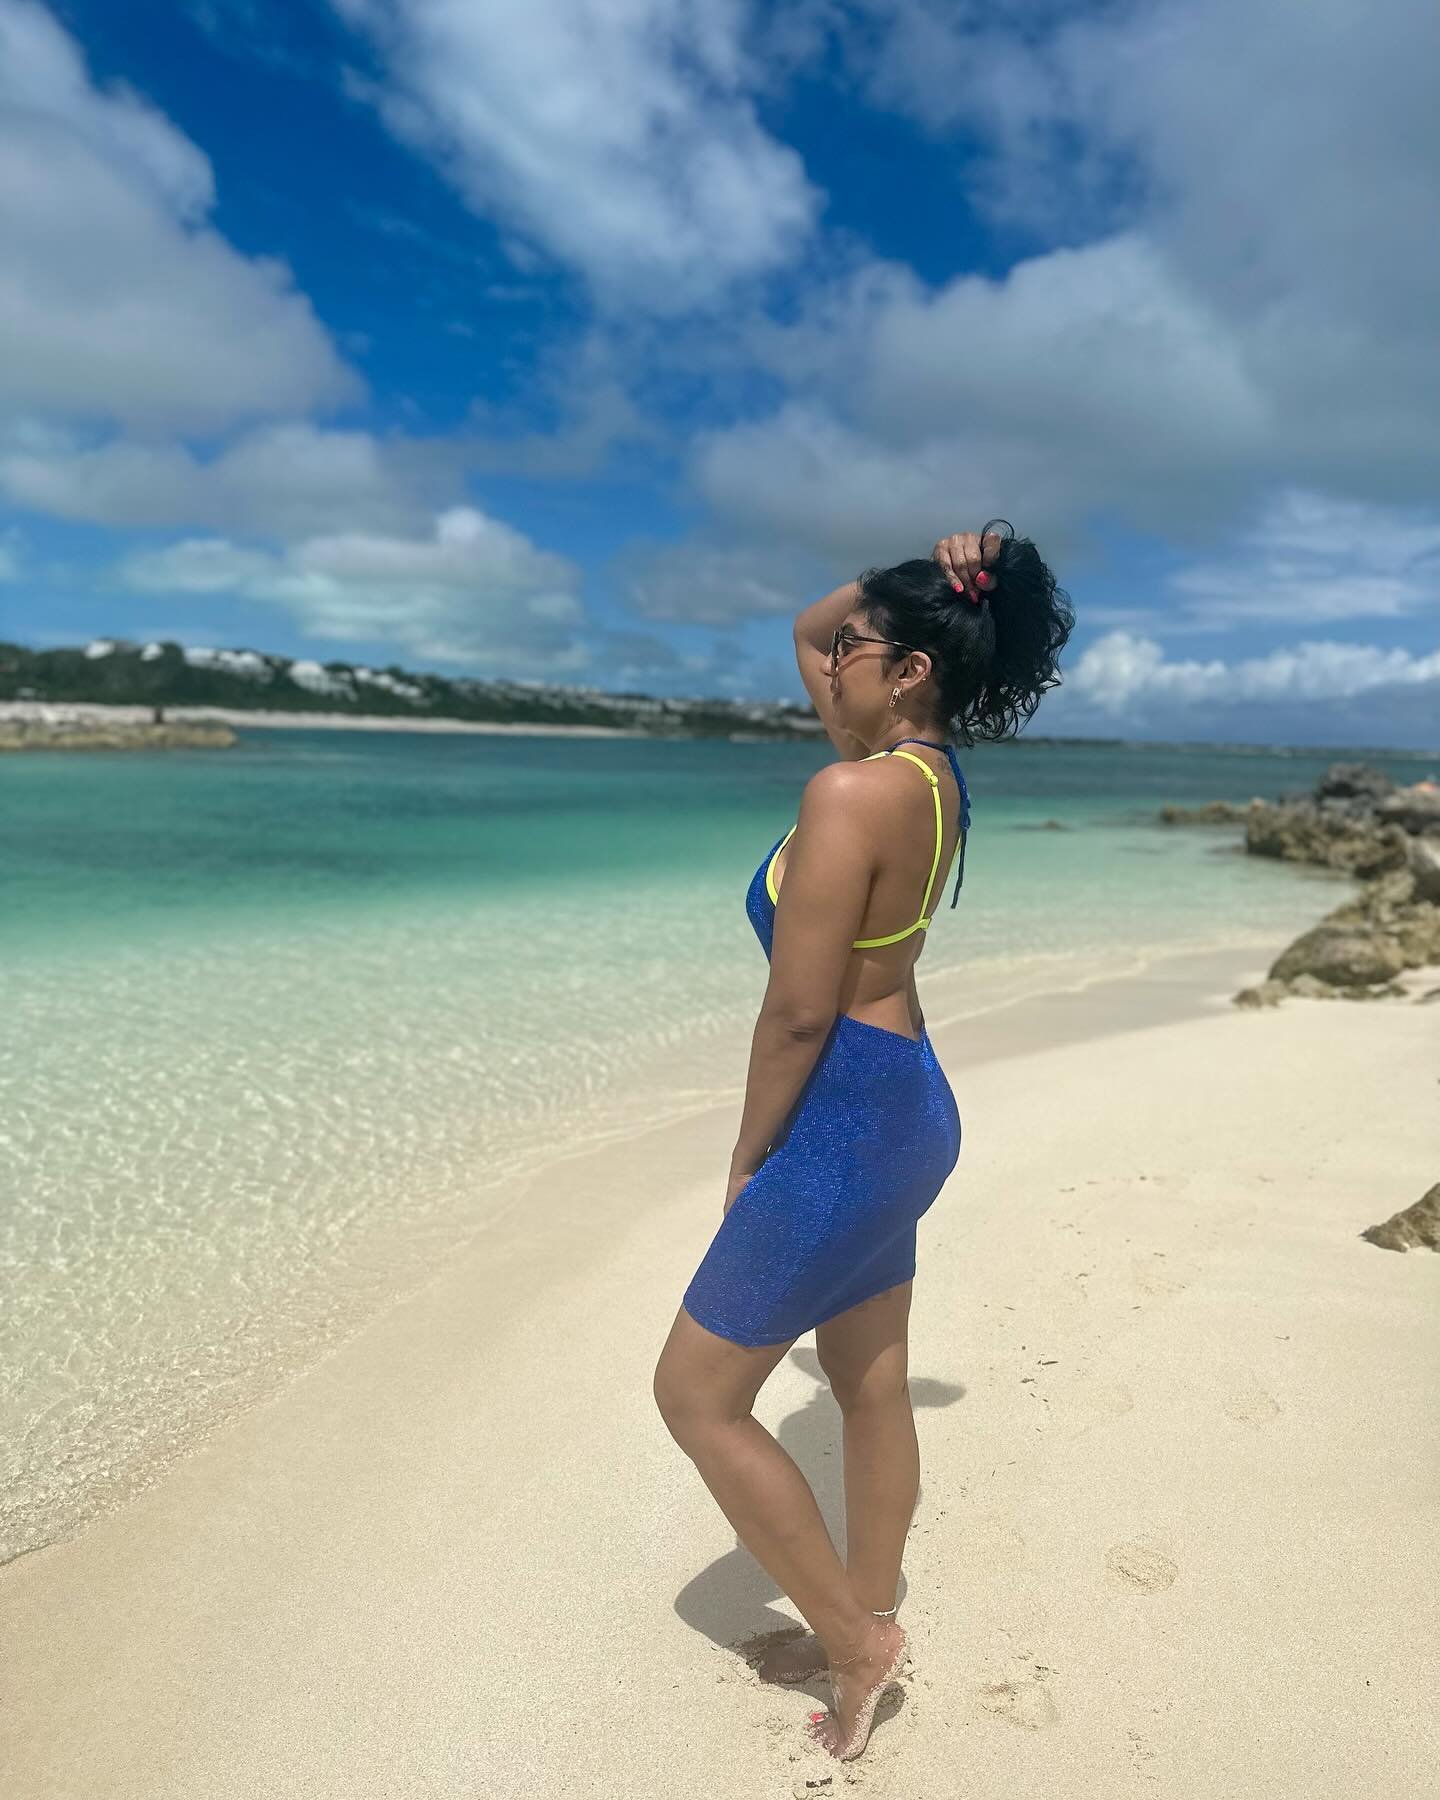 Girls just wanna have sun 🌞✨🧿

Found this hidden gem near Smith&rsquo;s Reef 🪸 It was so peaceful and serene 💙

Dress @meshki 

Beaches in Turks and Caicos, Turks and Caicos Islands, Providenciales, Provo, travel inspo, swimwear, bikini, island v